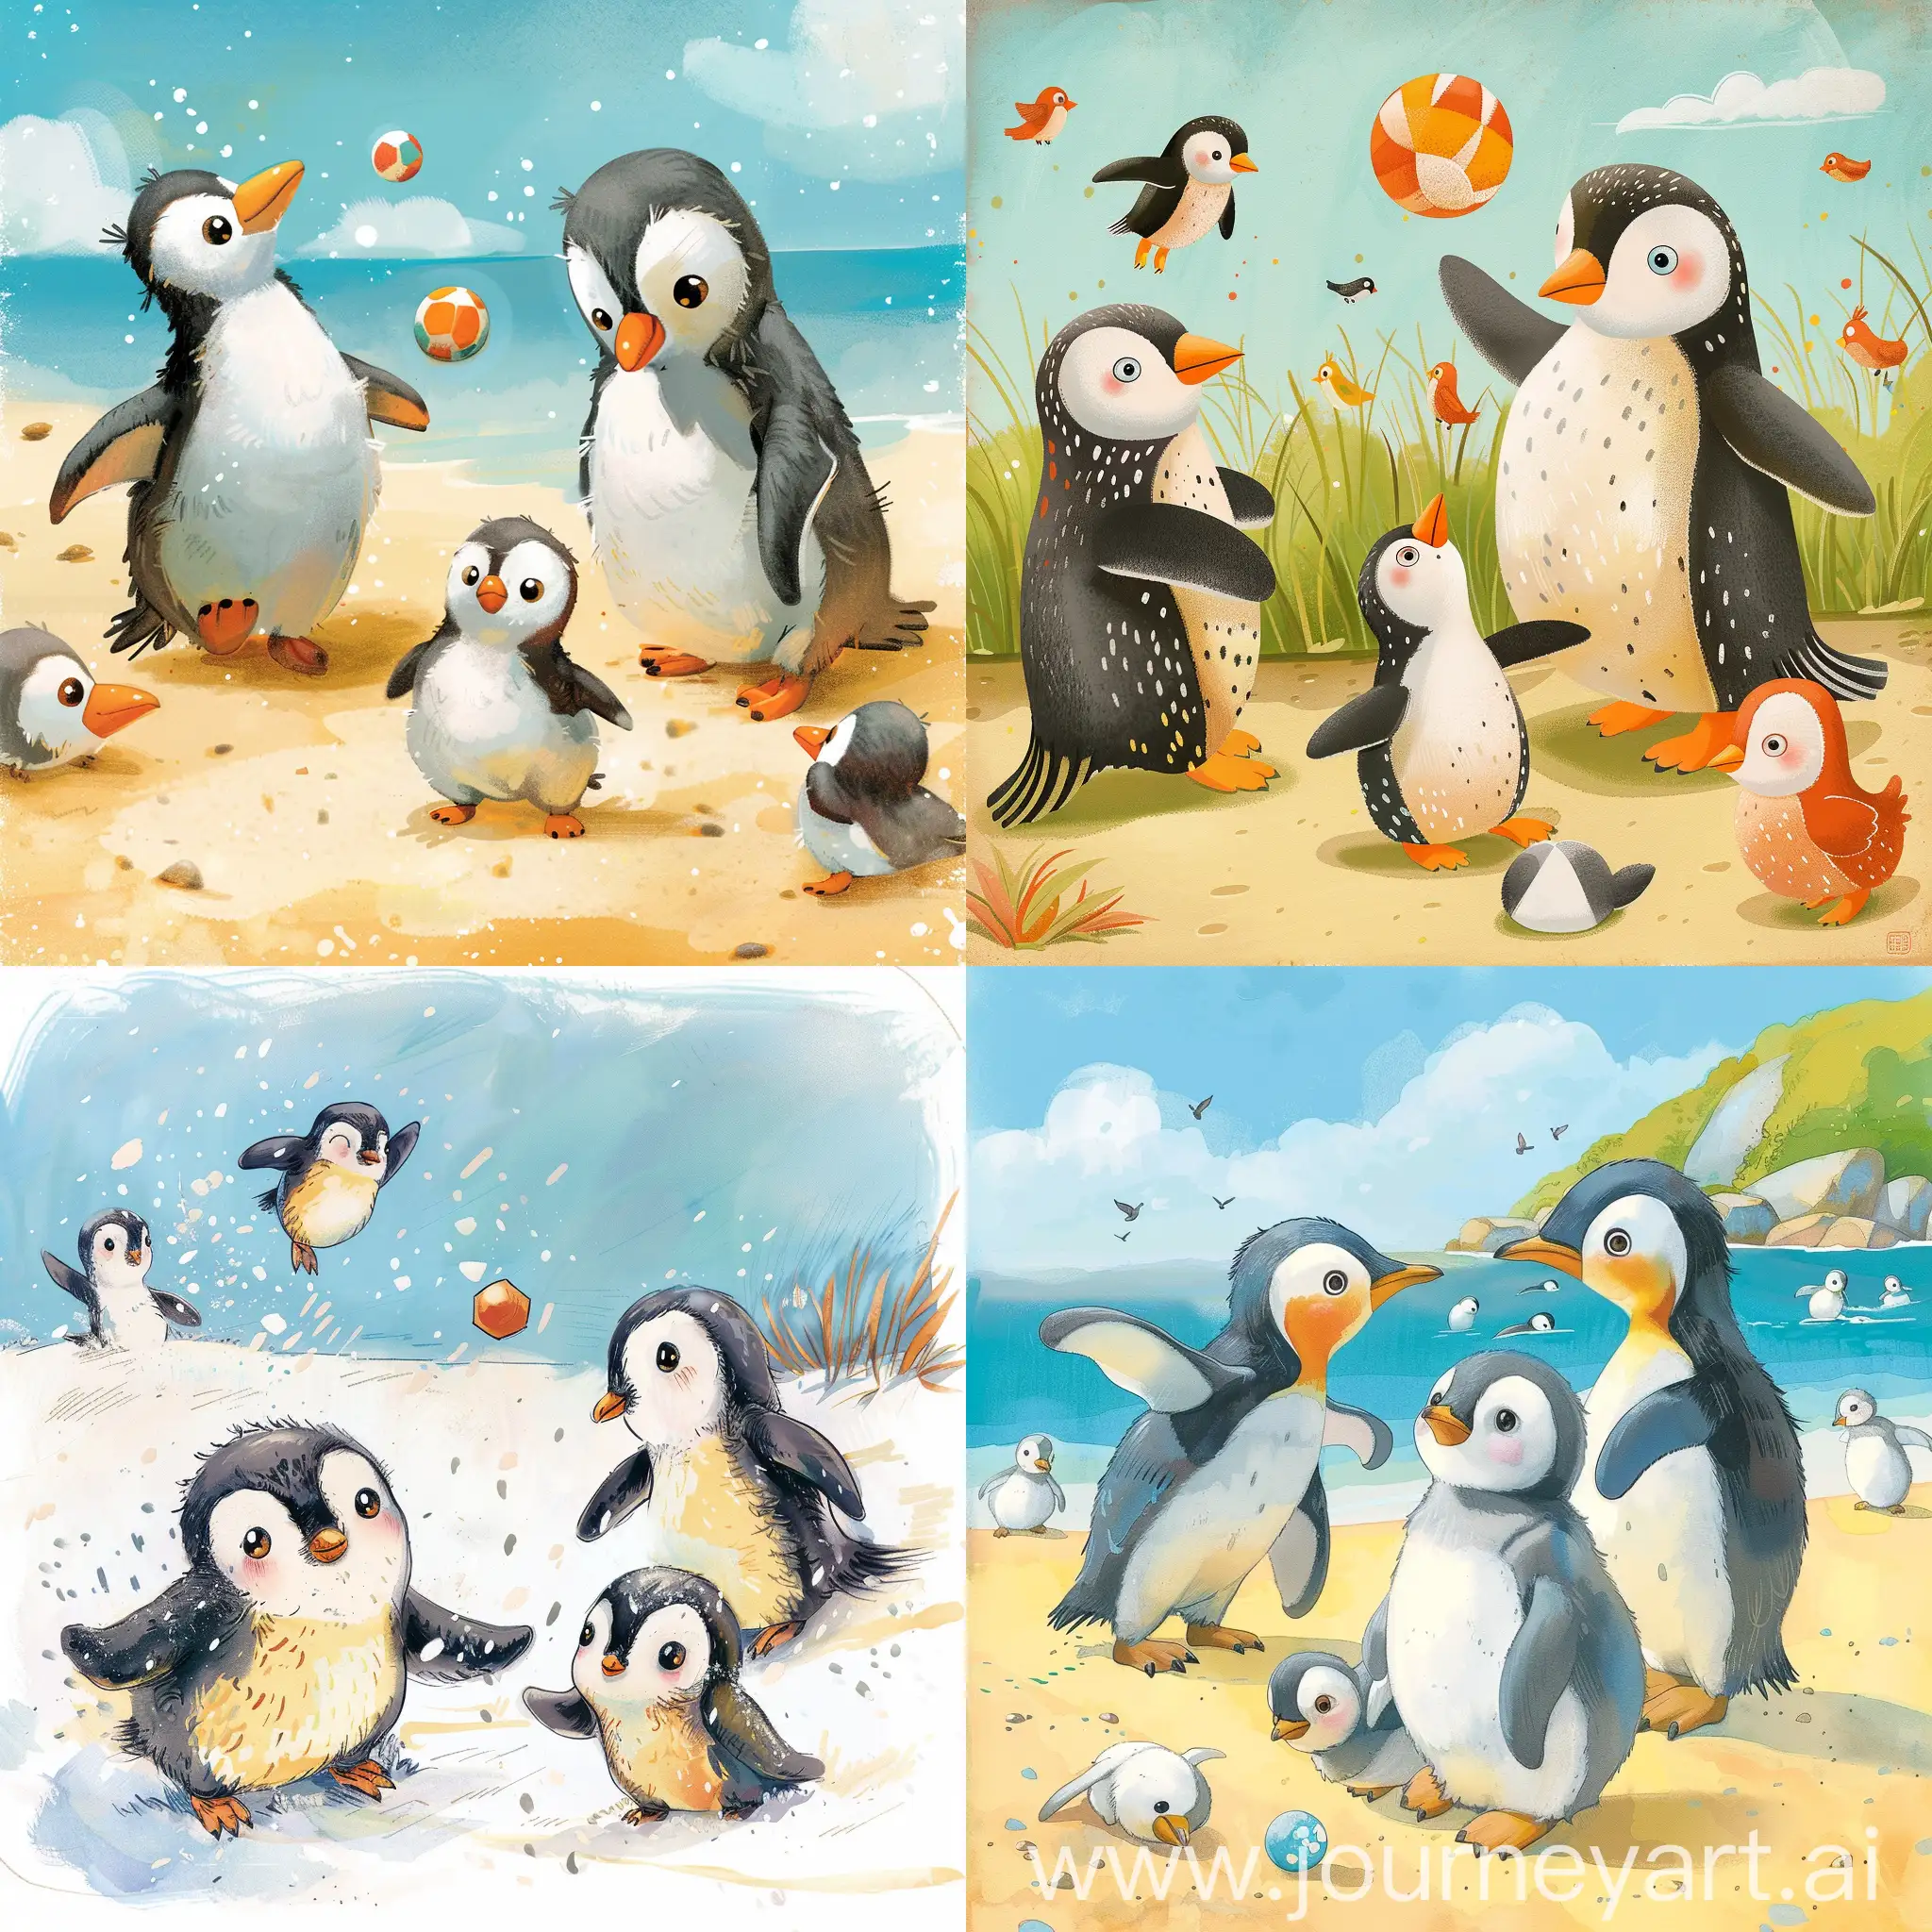 Penguin-Chick-Plays-with-Parents-and-Friends-in-Storybook-Illustration